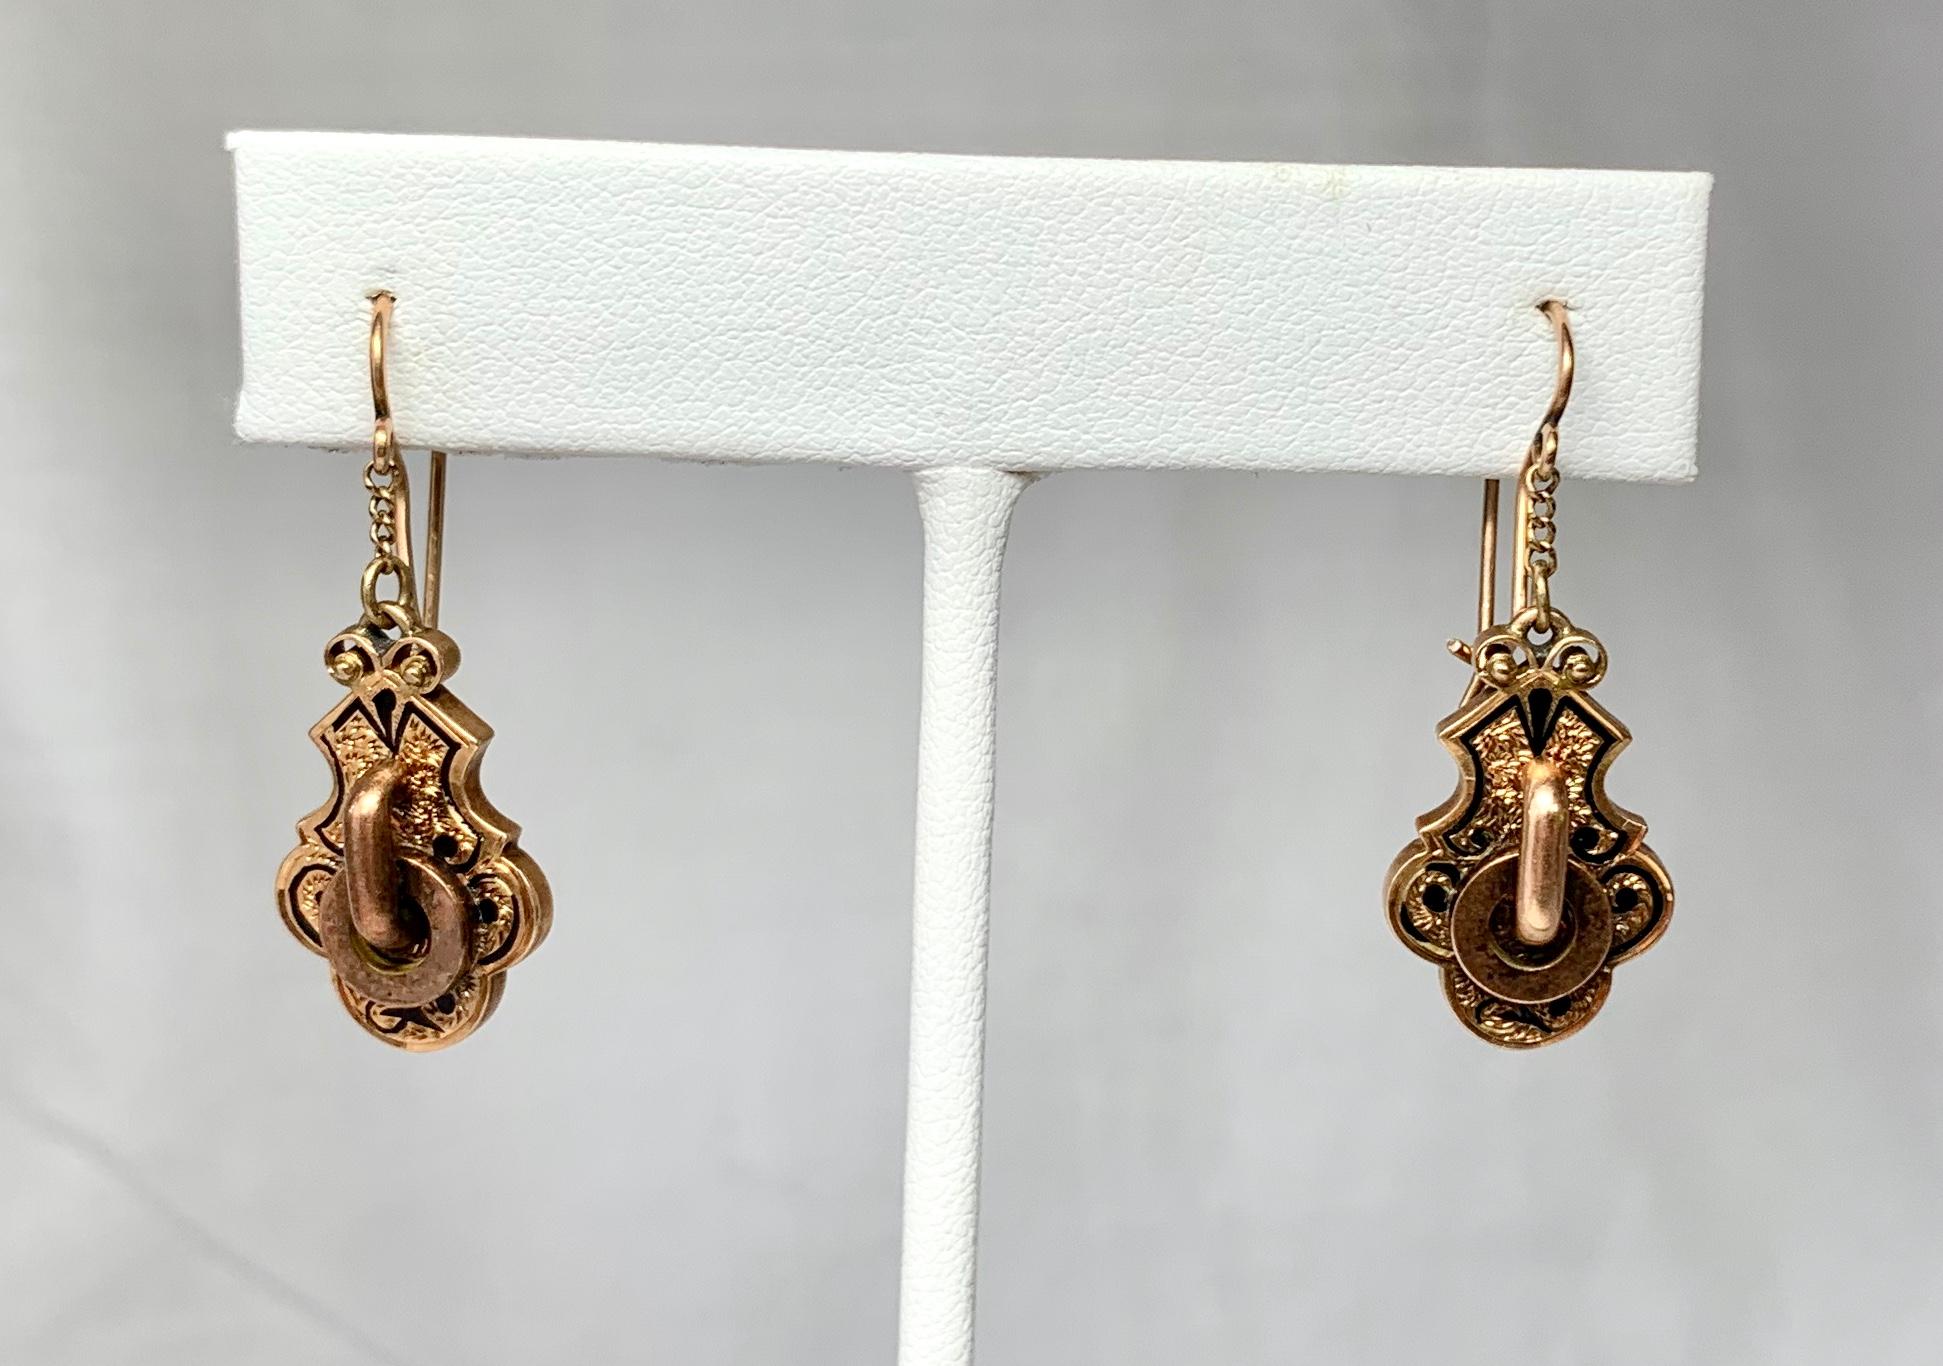 A beautiful pair of Antique Victorian 14 Karat Gold Door Knocker Pendant Earrings with black Taille d'Epargne Enamel and lovely engraving throughout.  The beautiful Etruscan Revival gold work is of the highest quality.  They are a wonderful size -